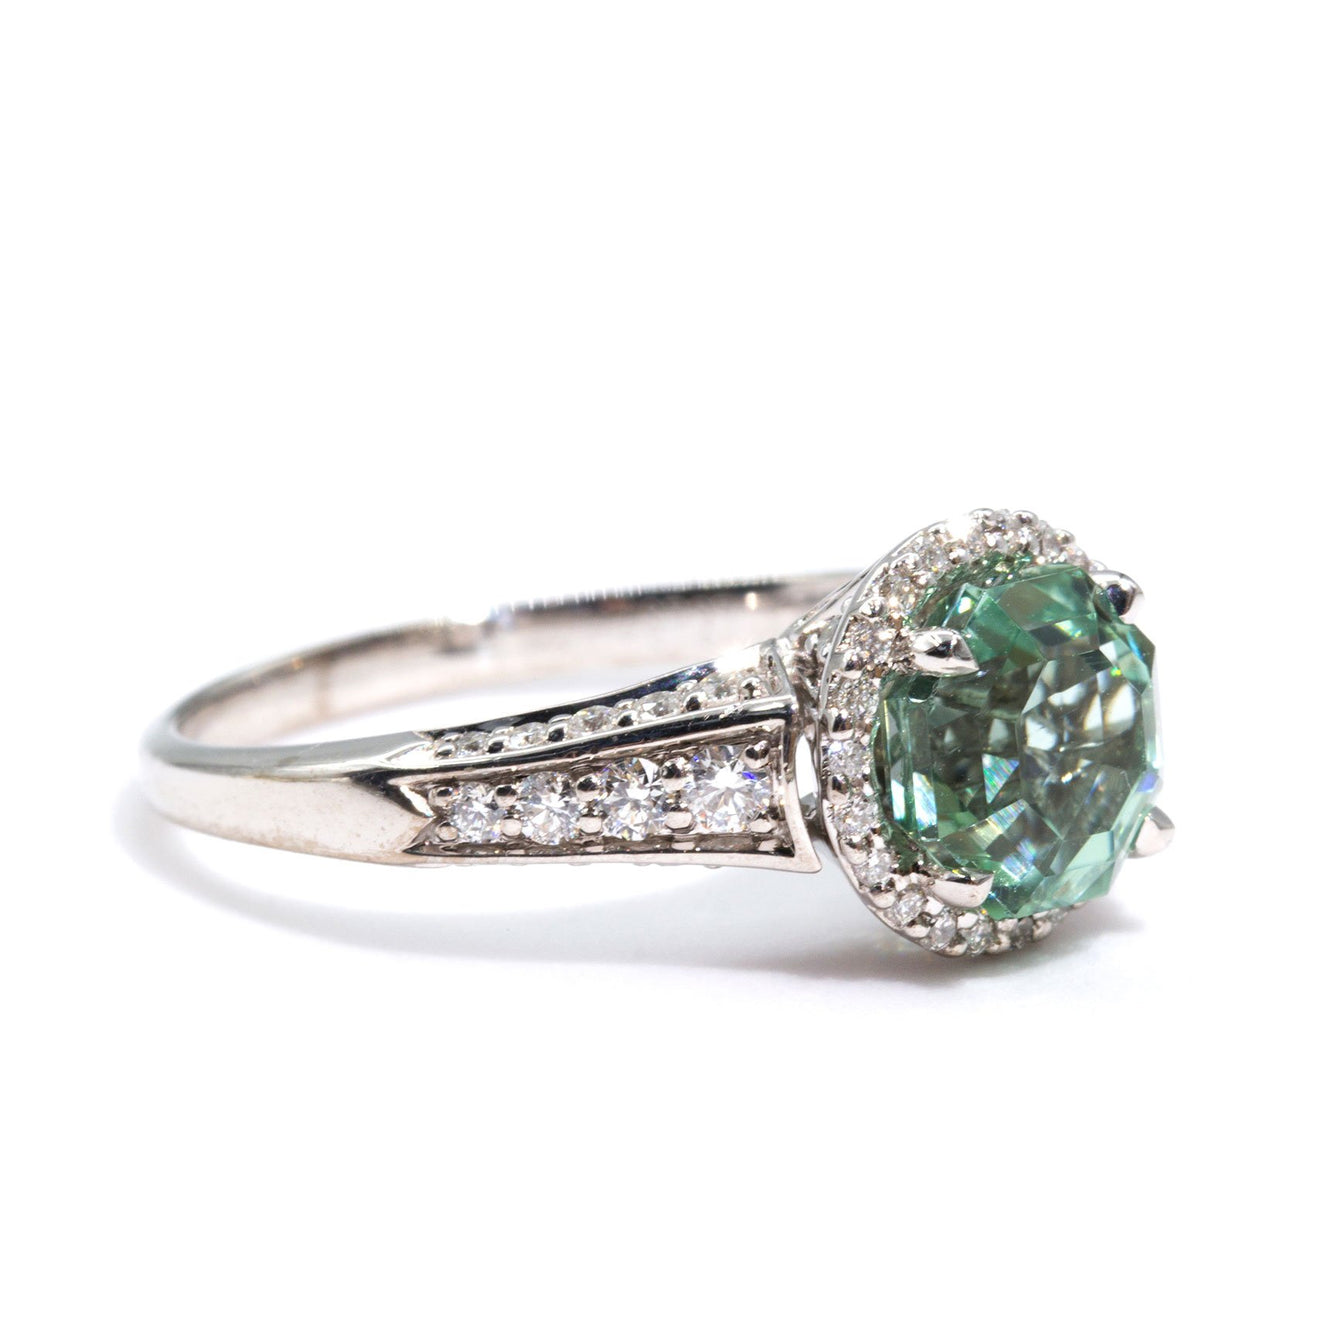 mint-tourmaline-vintage-ring-Ariana-V5-IJ-0421-531 Imperial Jewellery - Auctions, Antique, Vintage & Estate